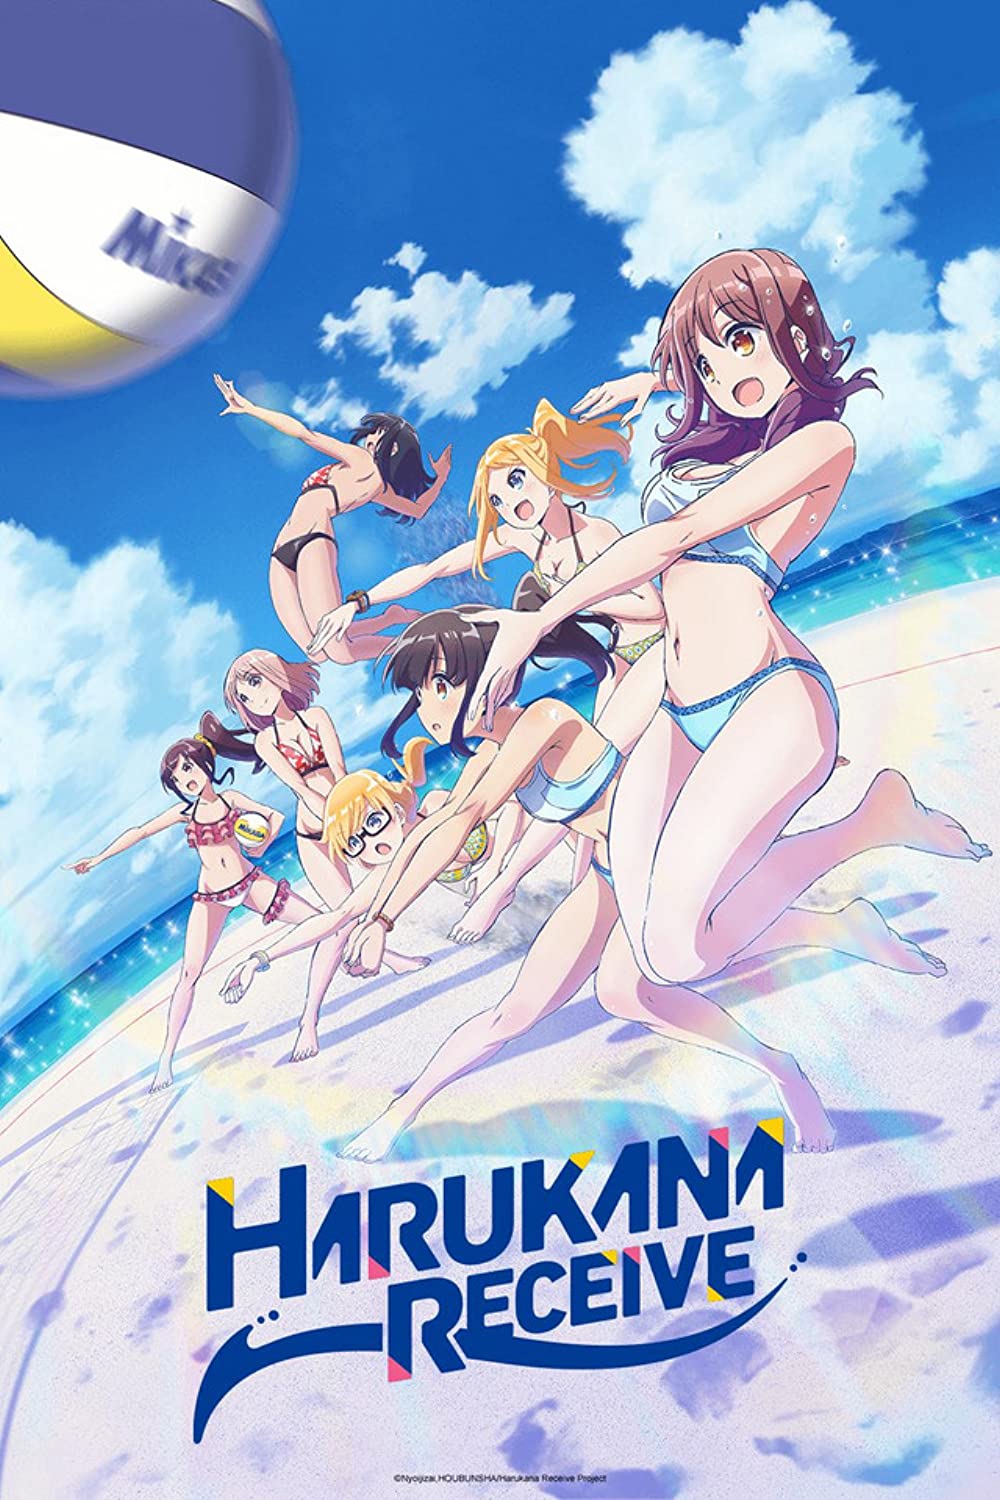 THEM Anime Boards • View topic - Staff review: Harukana Receive